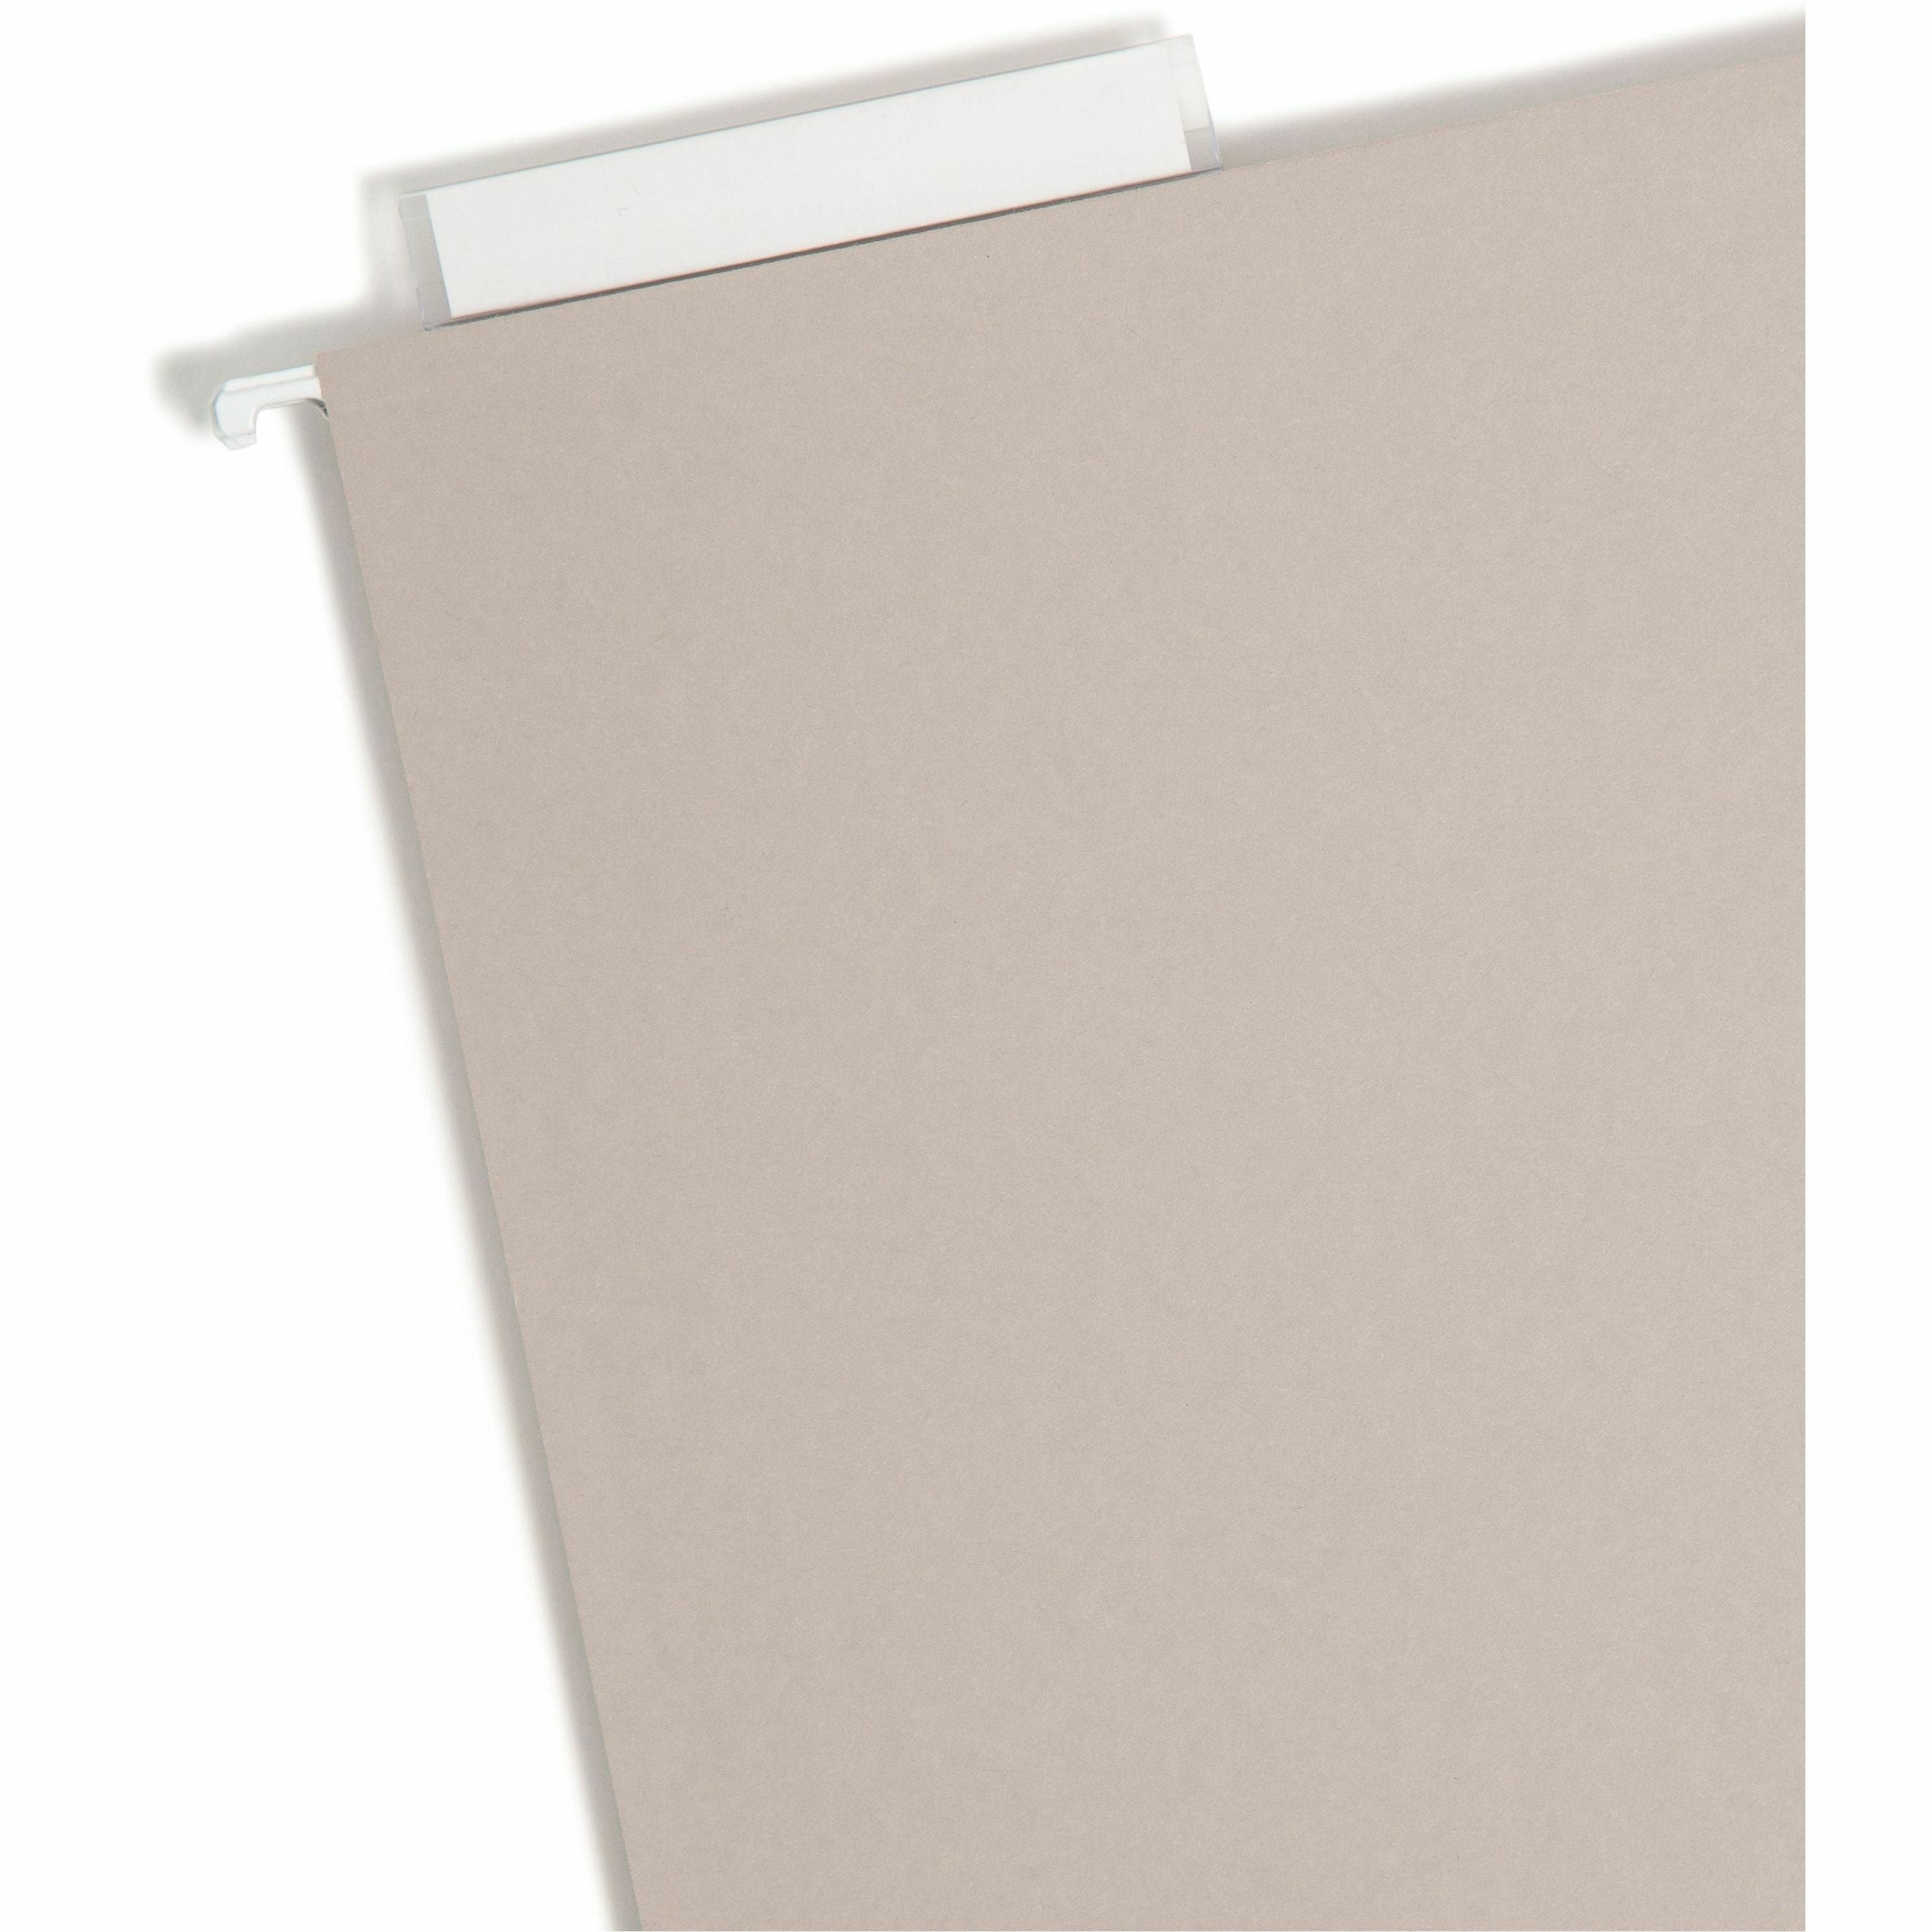 Smead TUFF Legal Recycled Hanging Folder - 8 1/2" x 14" - 2" Expansion - Top Tab Location - Steel Gray - 10% Recycled - 18 / Box - 